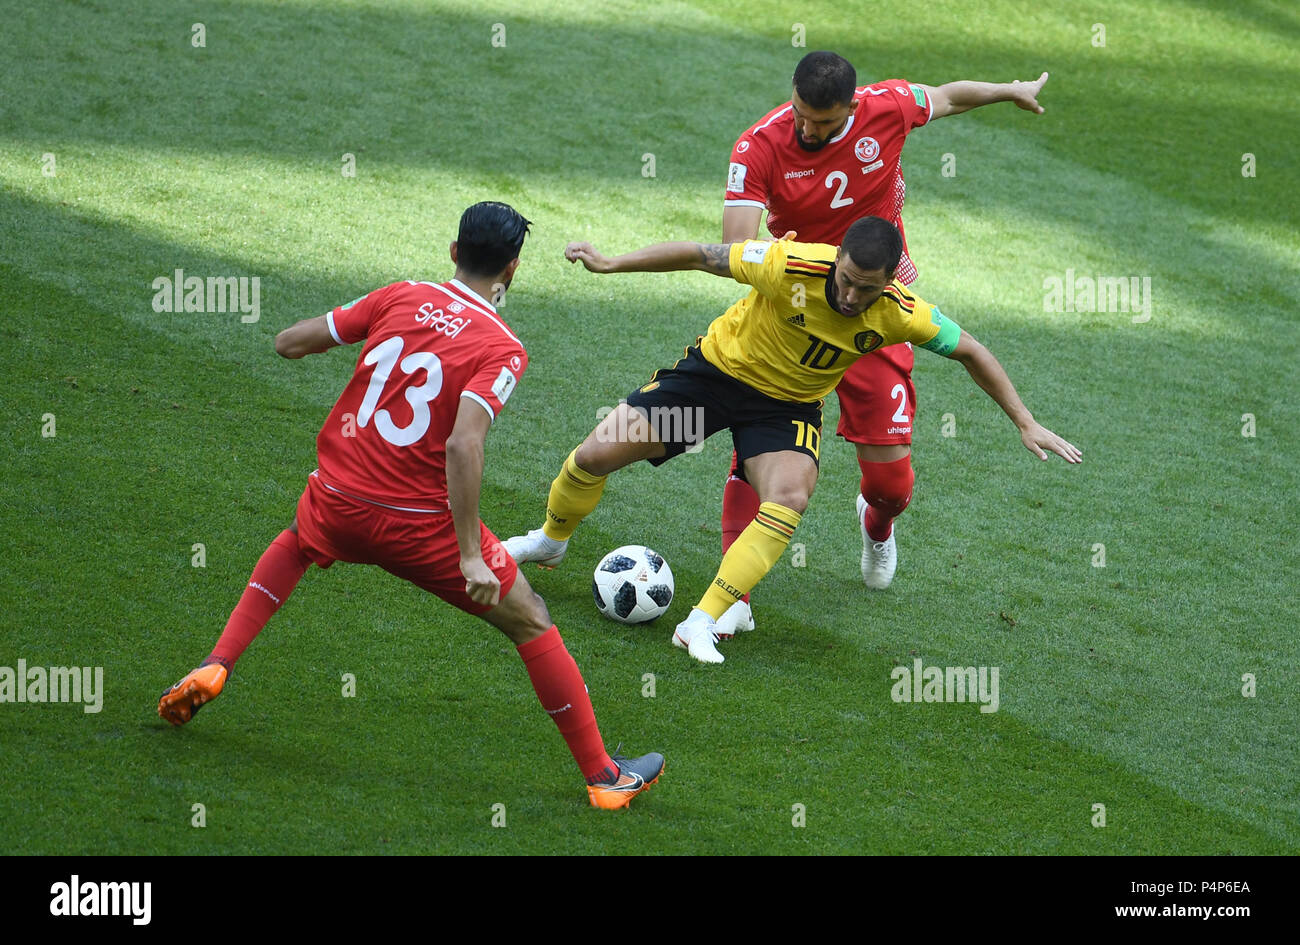 Moscow, Russia. 23rd June, 2018. Soccer: FIFA World Cup, Group G, 2nd matchday, Belgium vs Tunisia at Spartak Stadium: Eden Hazard (C) from Belgium and Syam Ben Youssef (R) and Ferjani Sassi (L) from Tunisia vie for the ball. Credit: Federico Gambarini/dpa/Alamy Live News Stock Photo